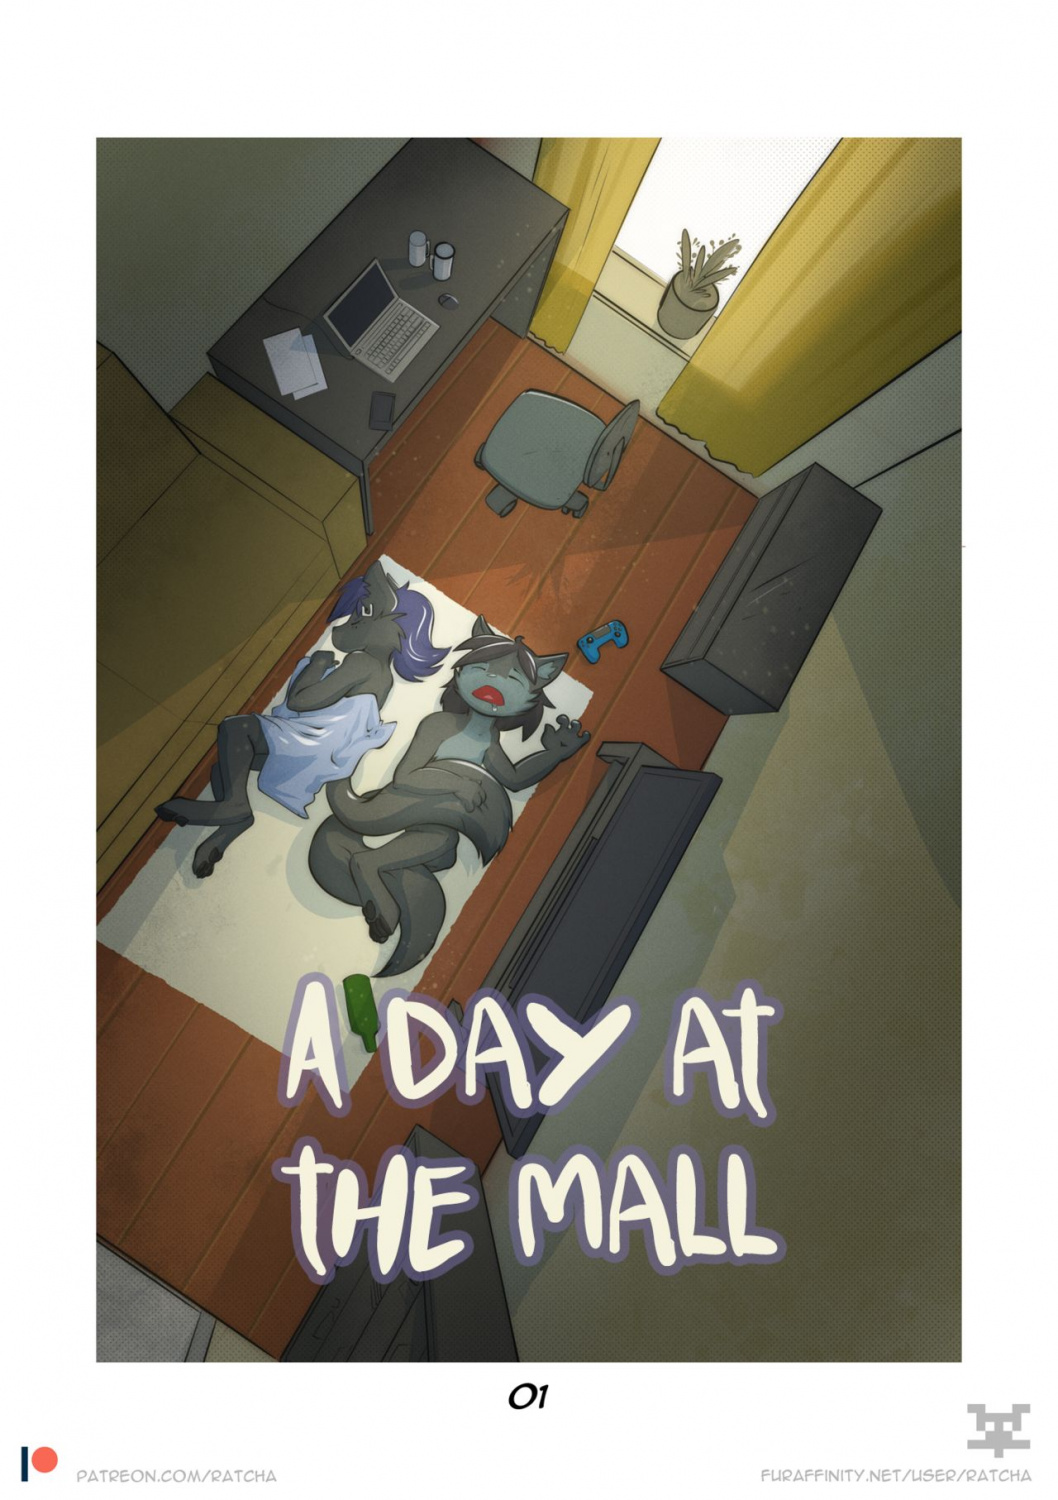 Chapter 2 - A Day at the Mall porn comics Oral sex, Best, Blowjob, Creampie, Deepthroat, Furry, incest, Masturbation, Stockings, Straight, X-Ray